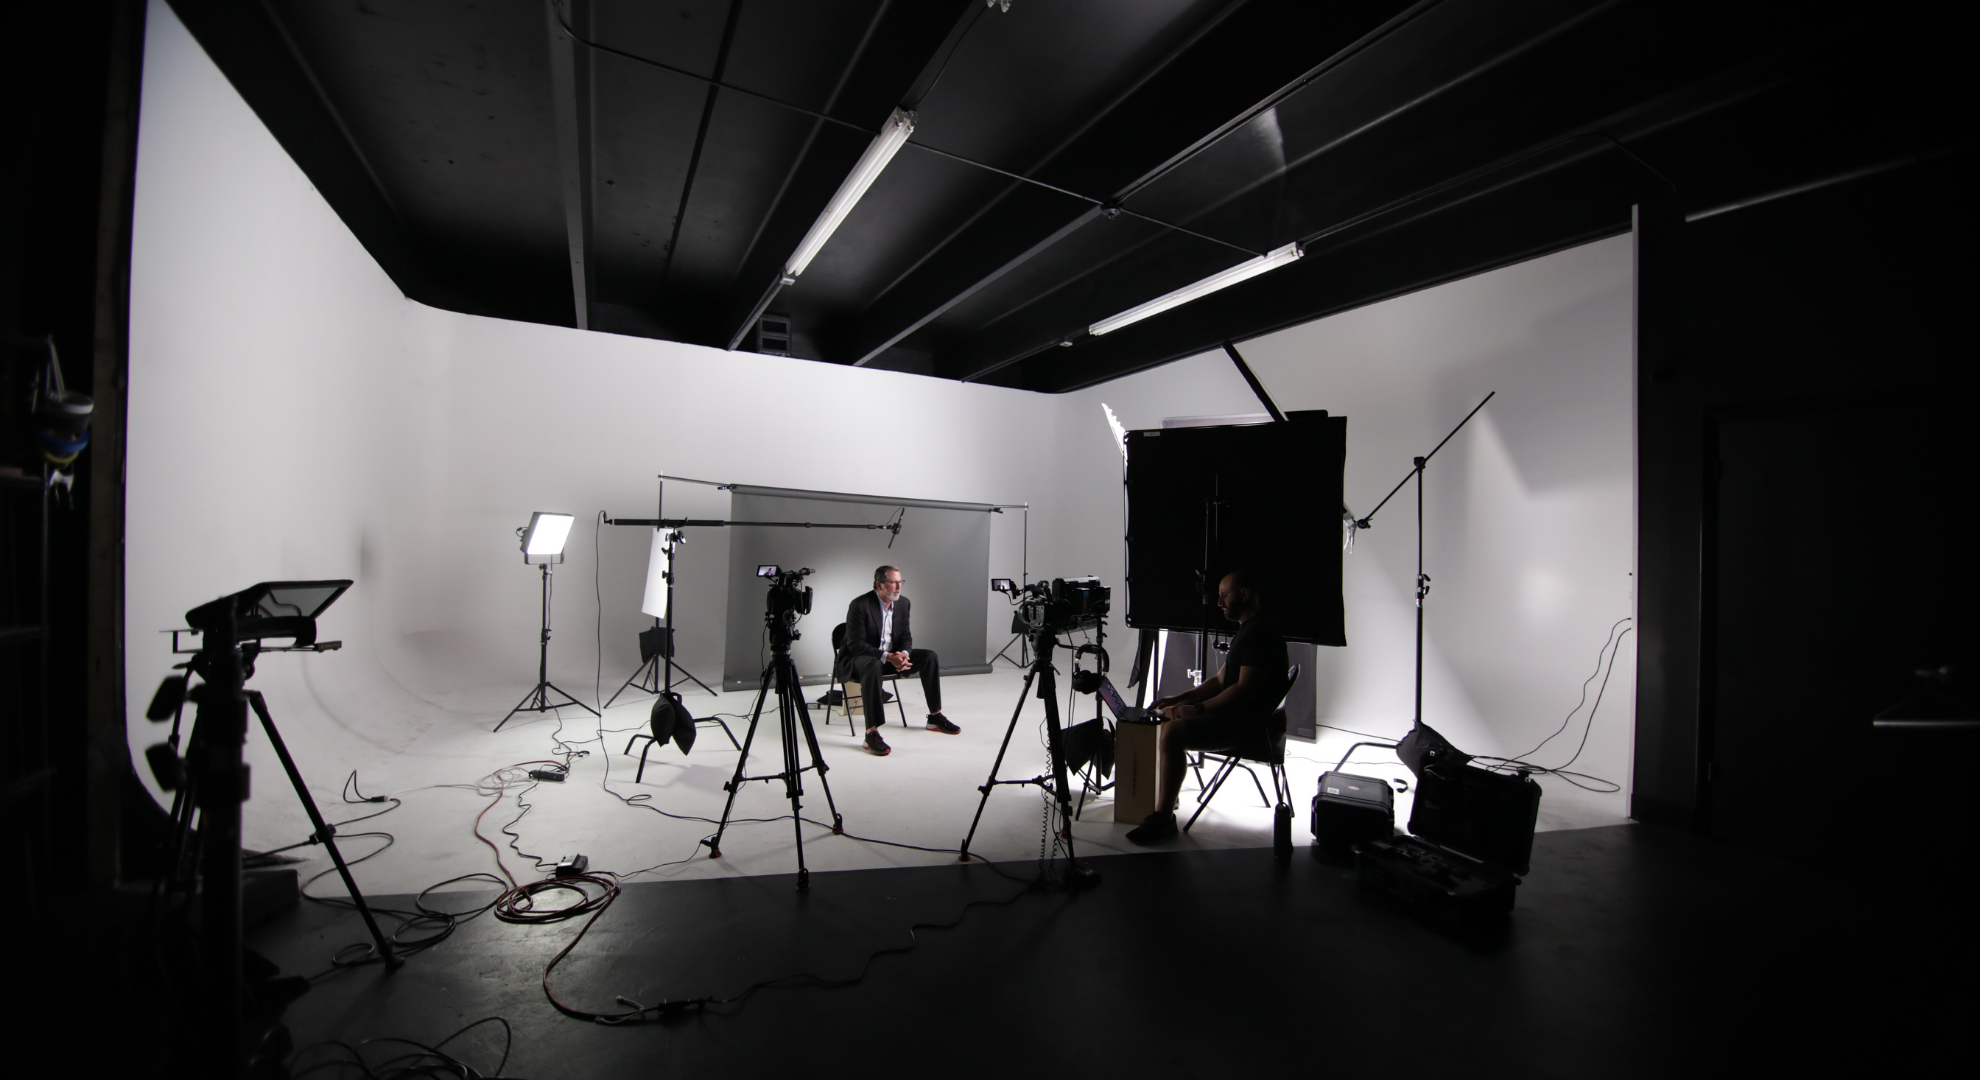 The Best Lighting, Kits, and Tips for Video Interviews